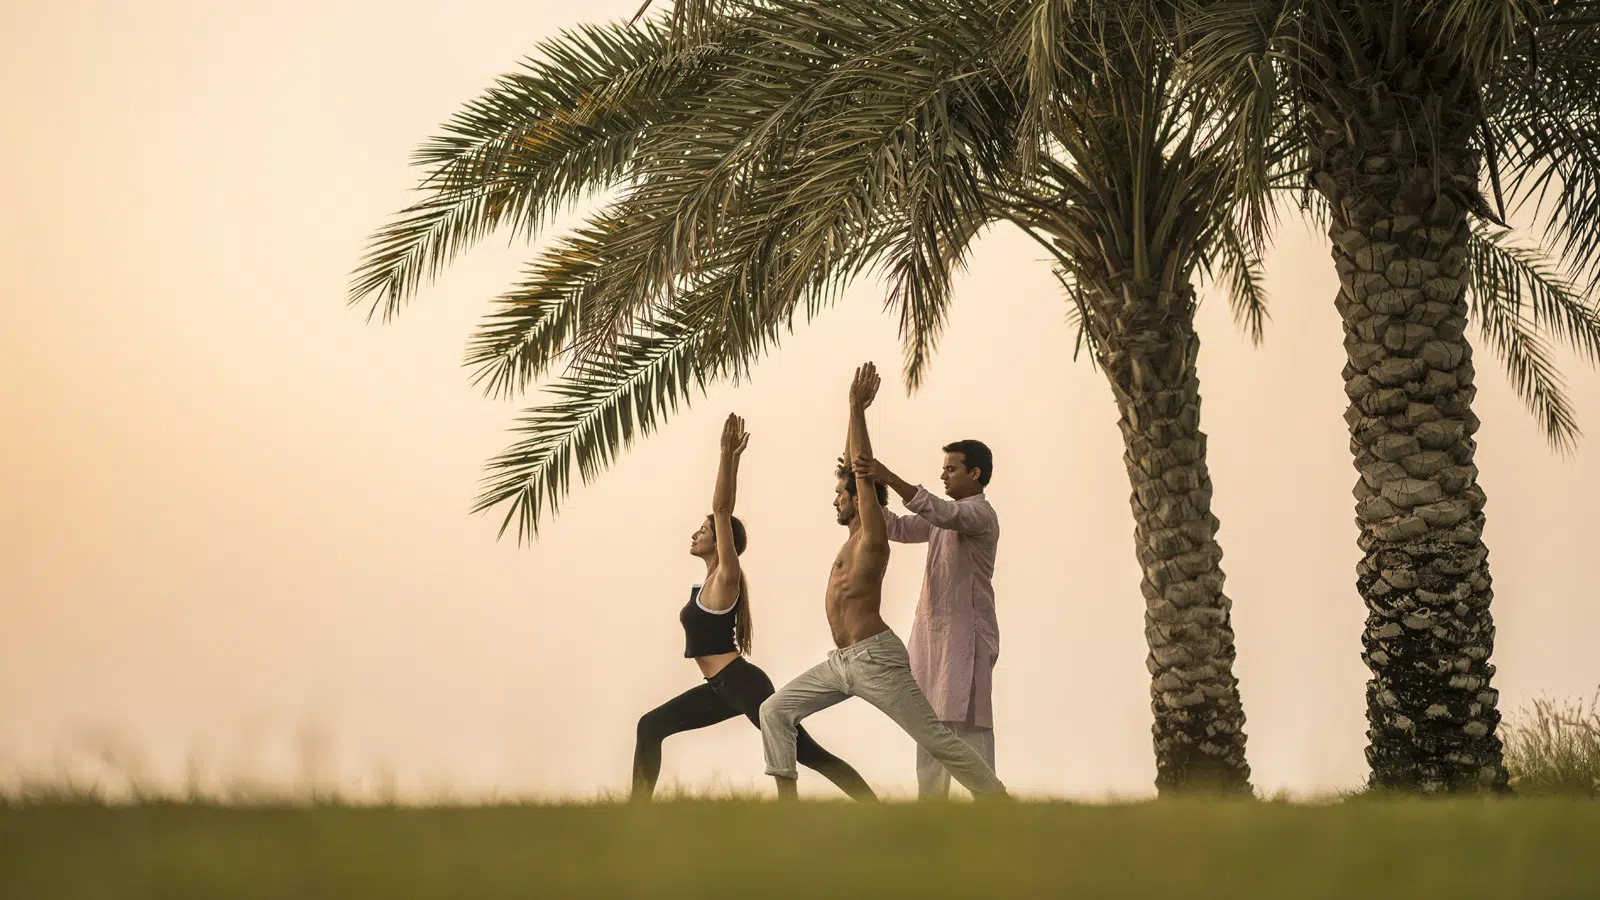 People practice yoga under a tree in bahrain bay